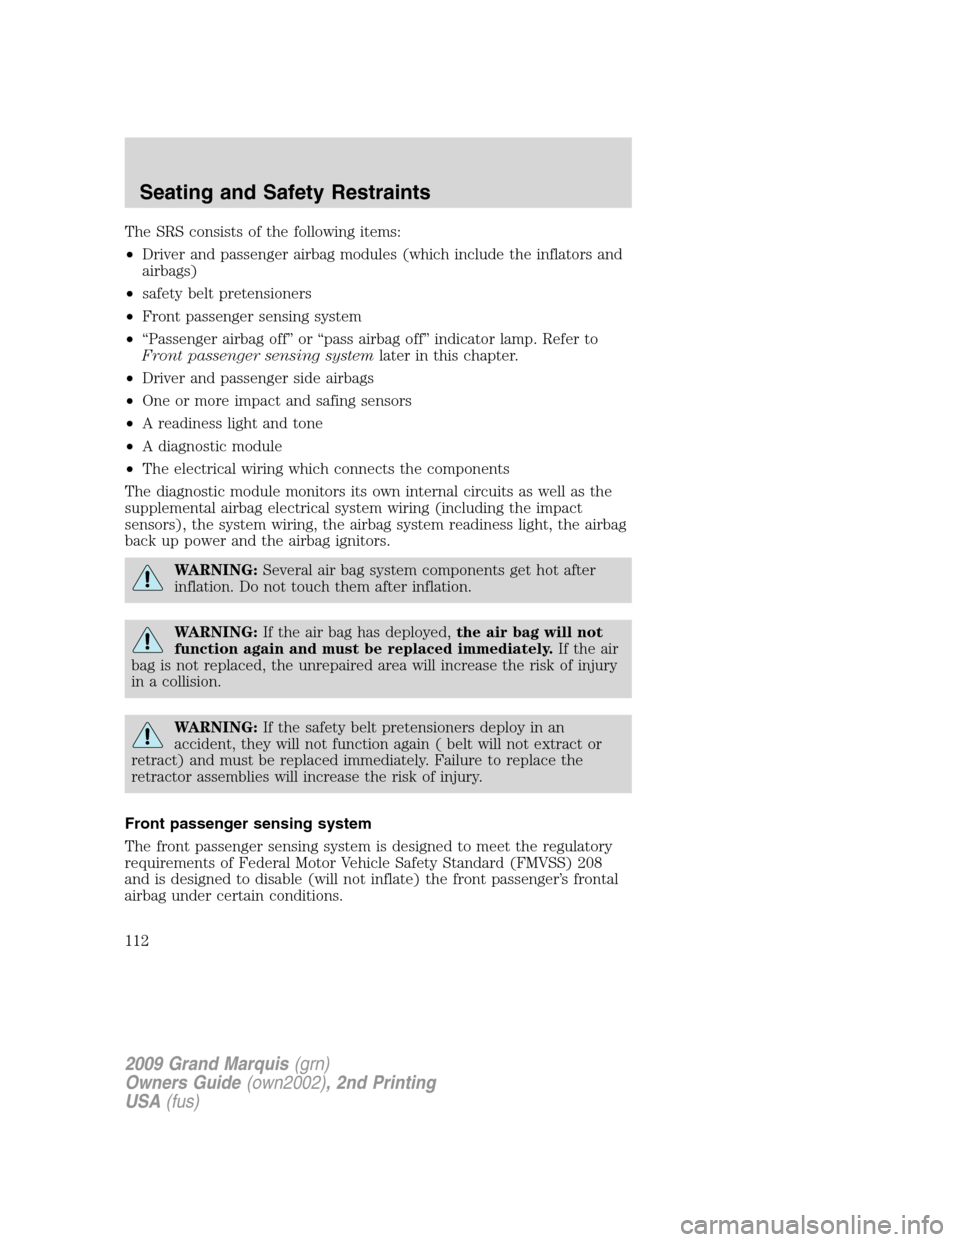 Mercury Grand Marquis 2009  s Workshop Manual The SRS consists of the following items:
•Driver and passenger airbag modules (which include the inflators and
airbags)
•safety belt pretensioners
•Front passenger sensing system
•“Passenger